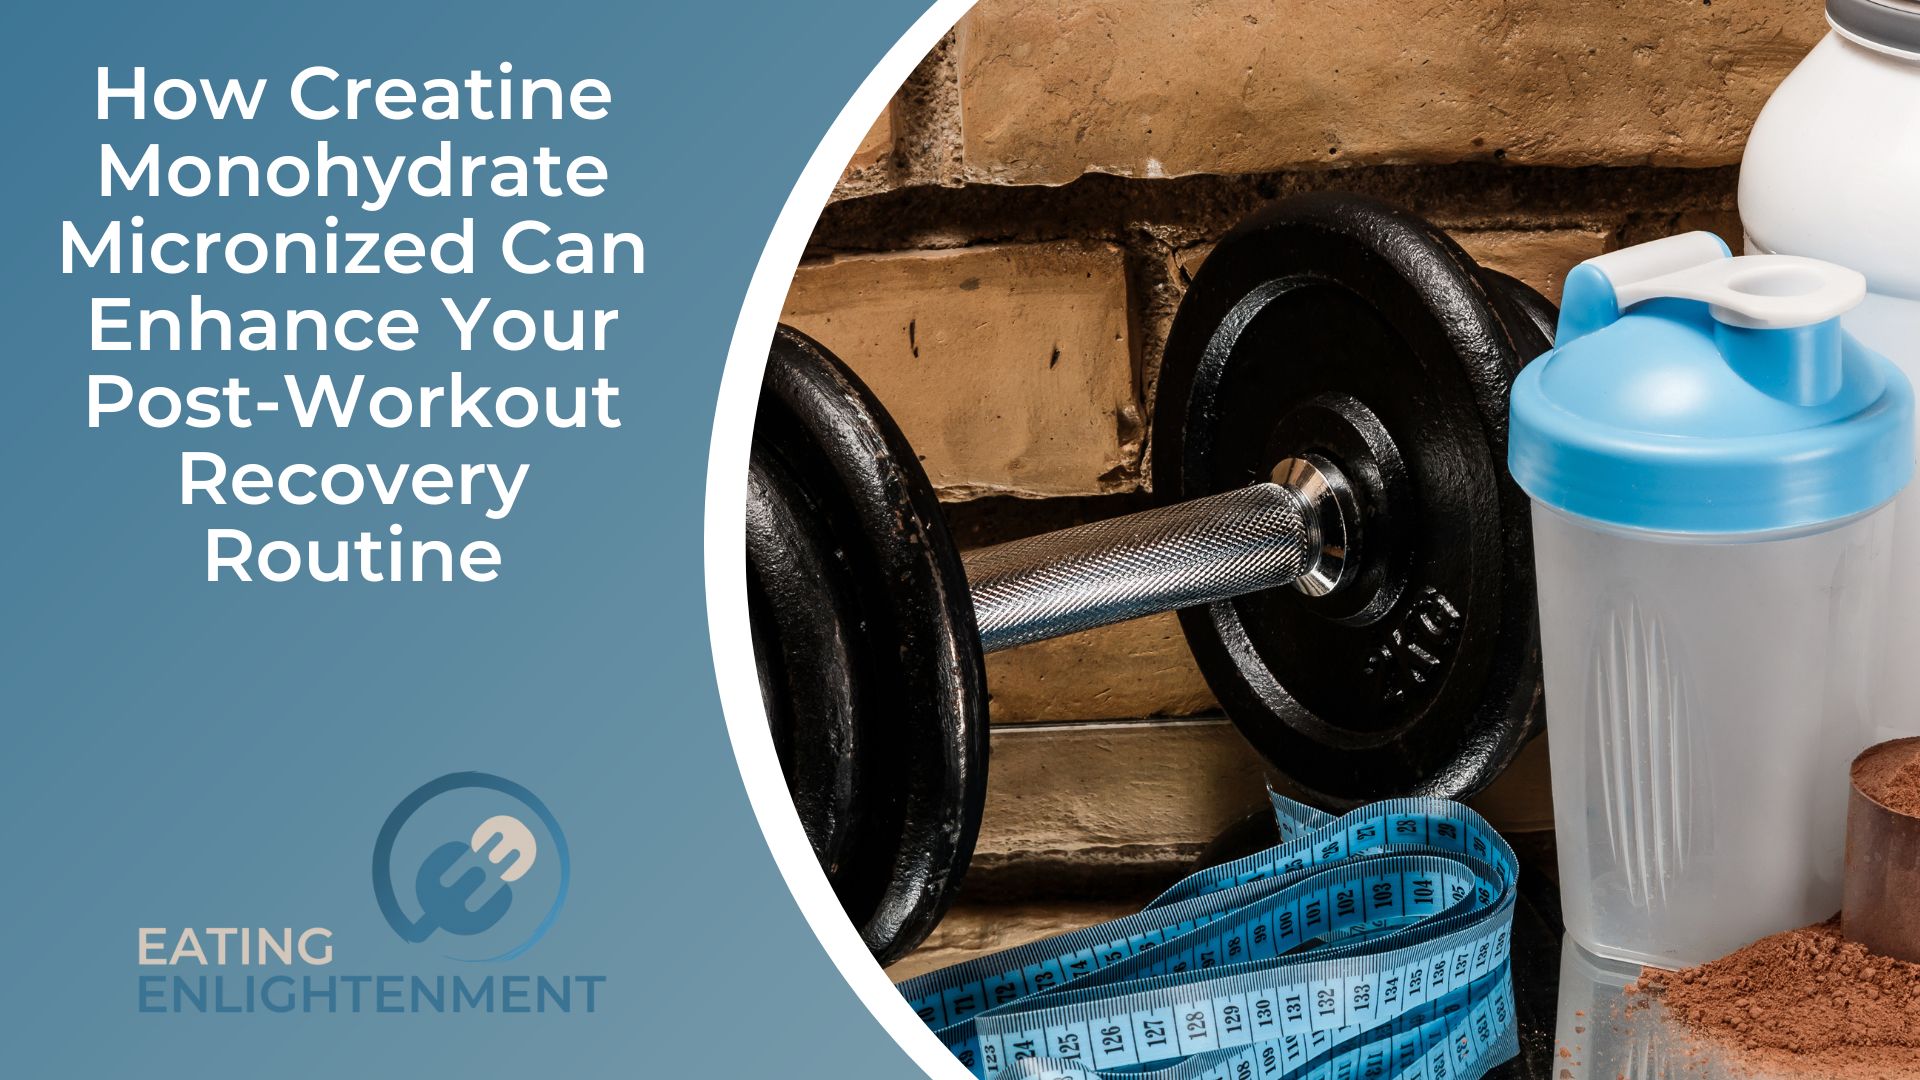 How Creatine Monohydrate Micronized Can Enhance Your Post-Workout Recovery Routine